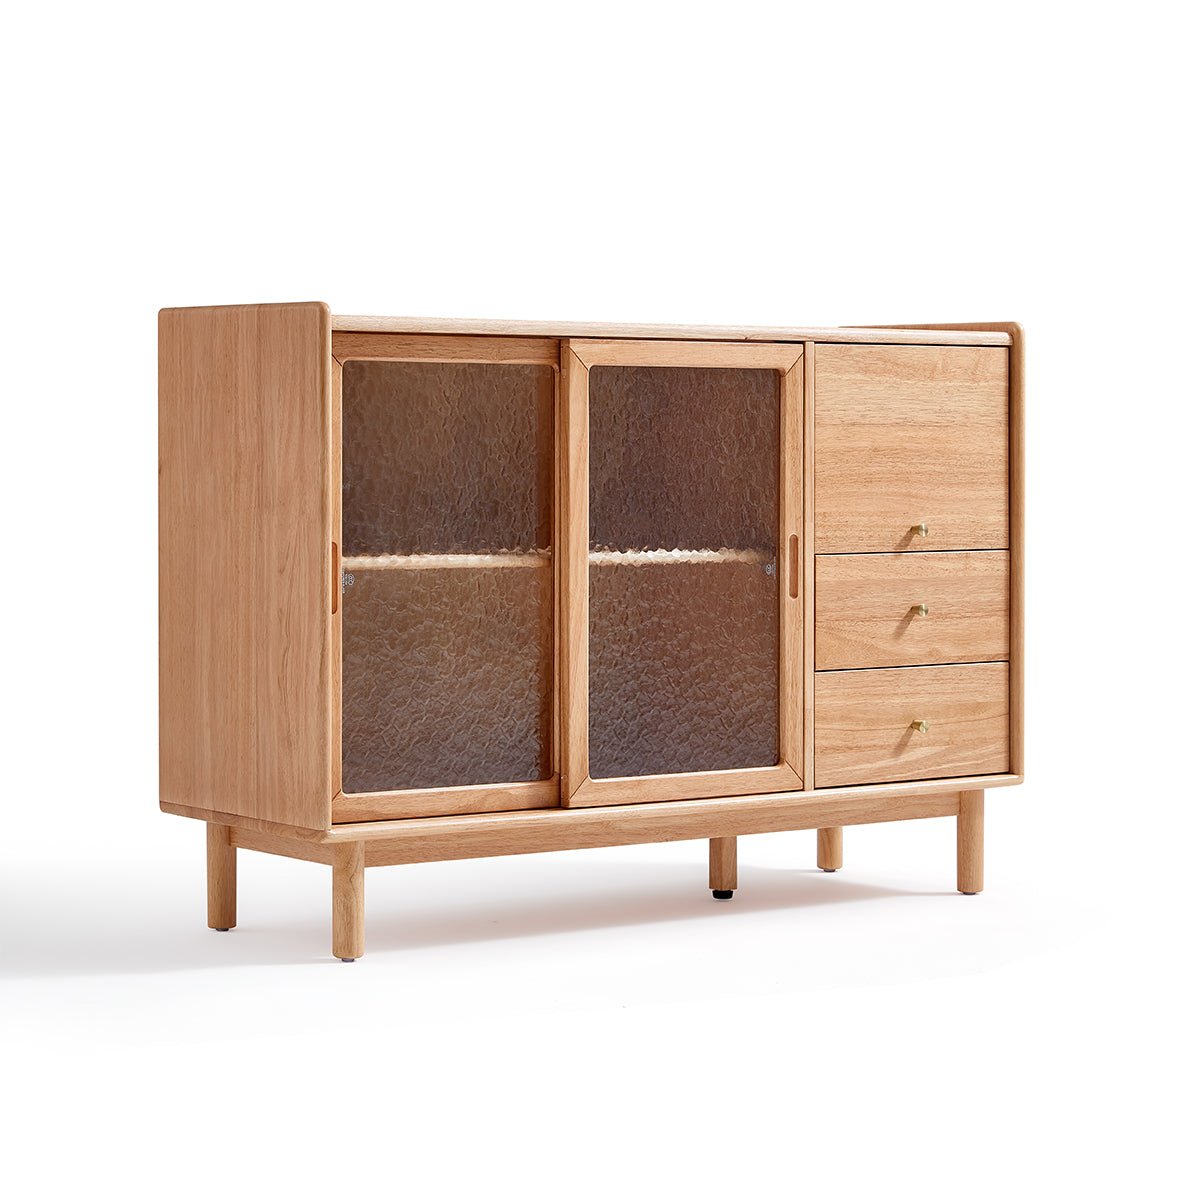 COZ Firefly Organic 1.2m Dining Sideboard Cabinet - 0cm